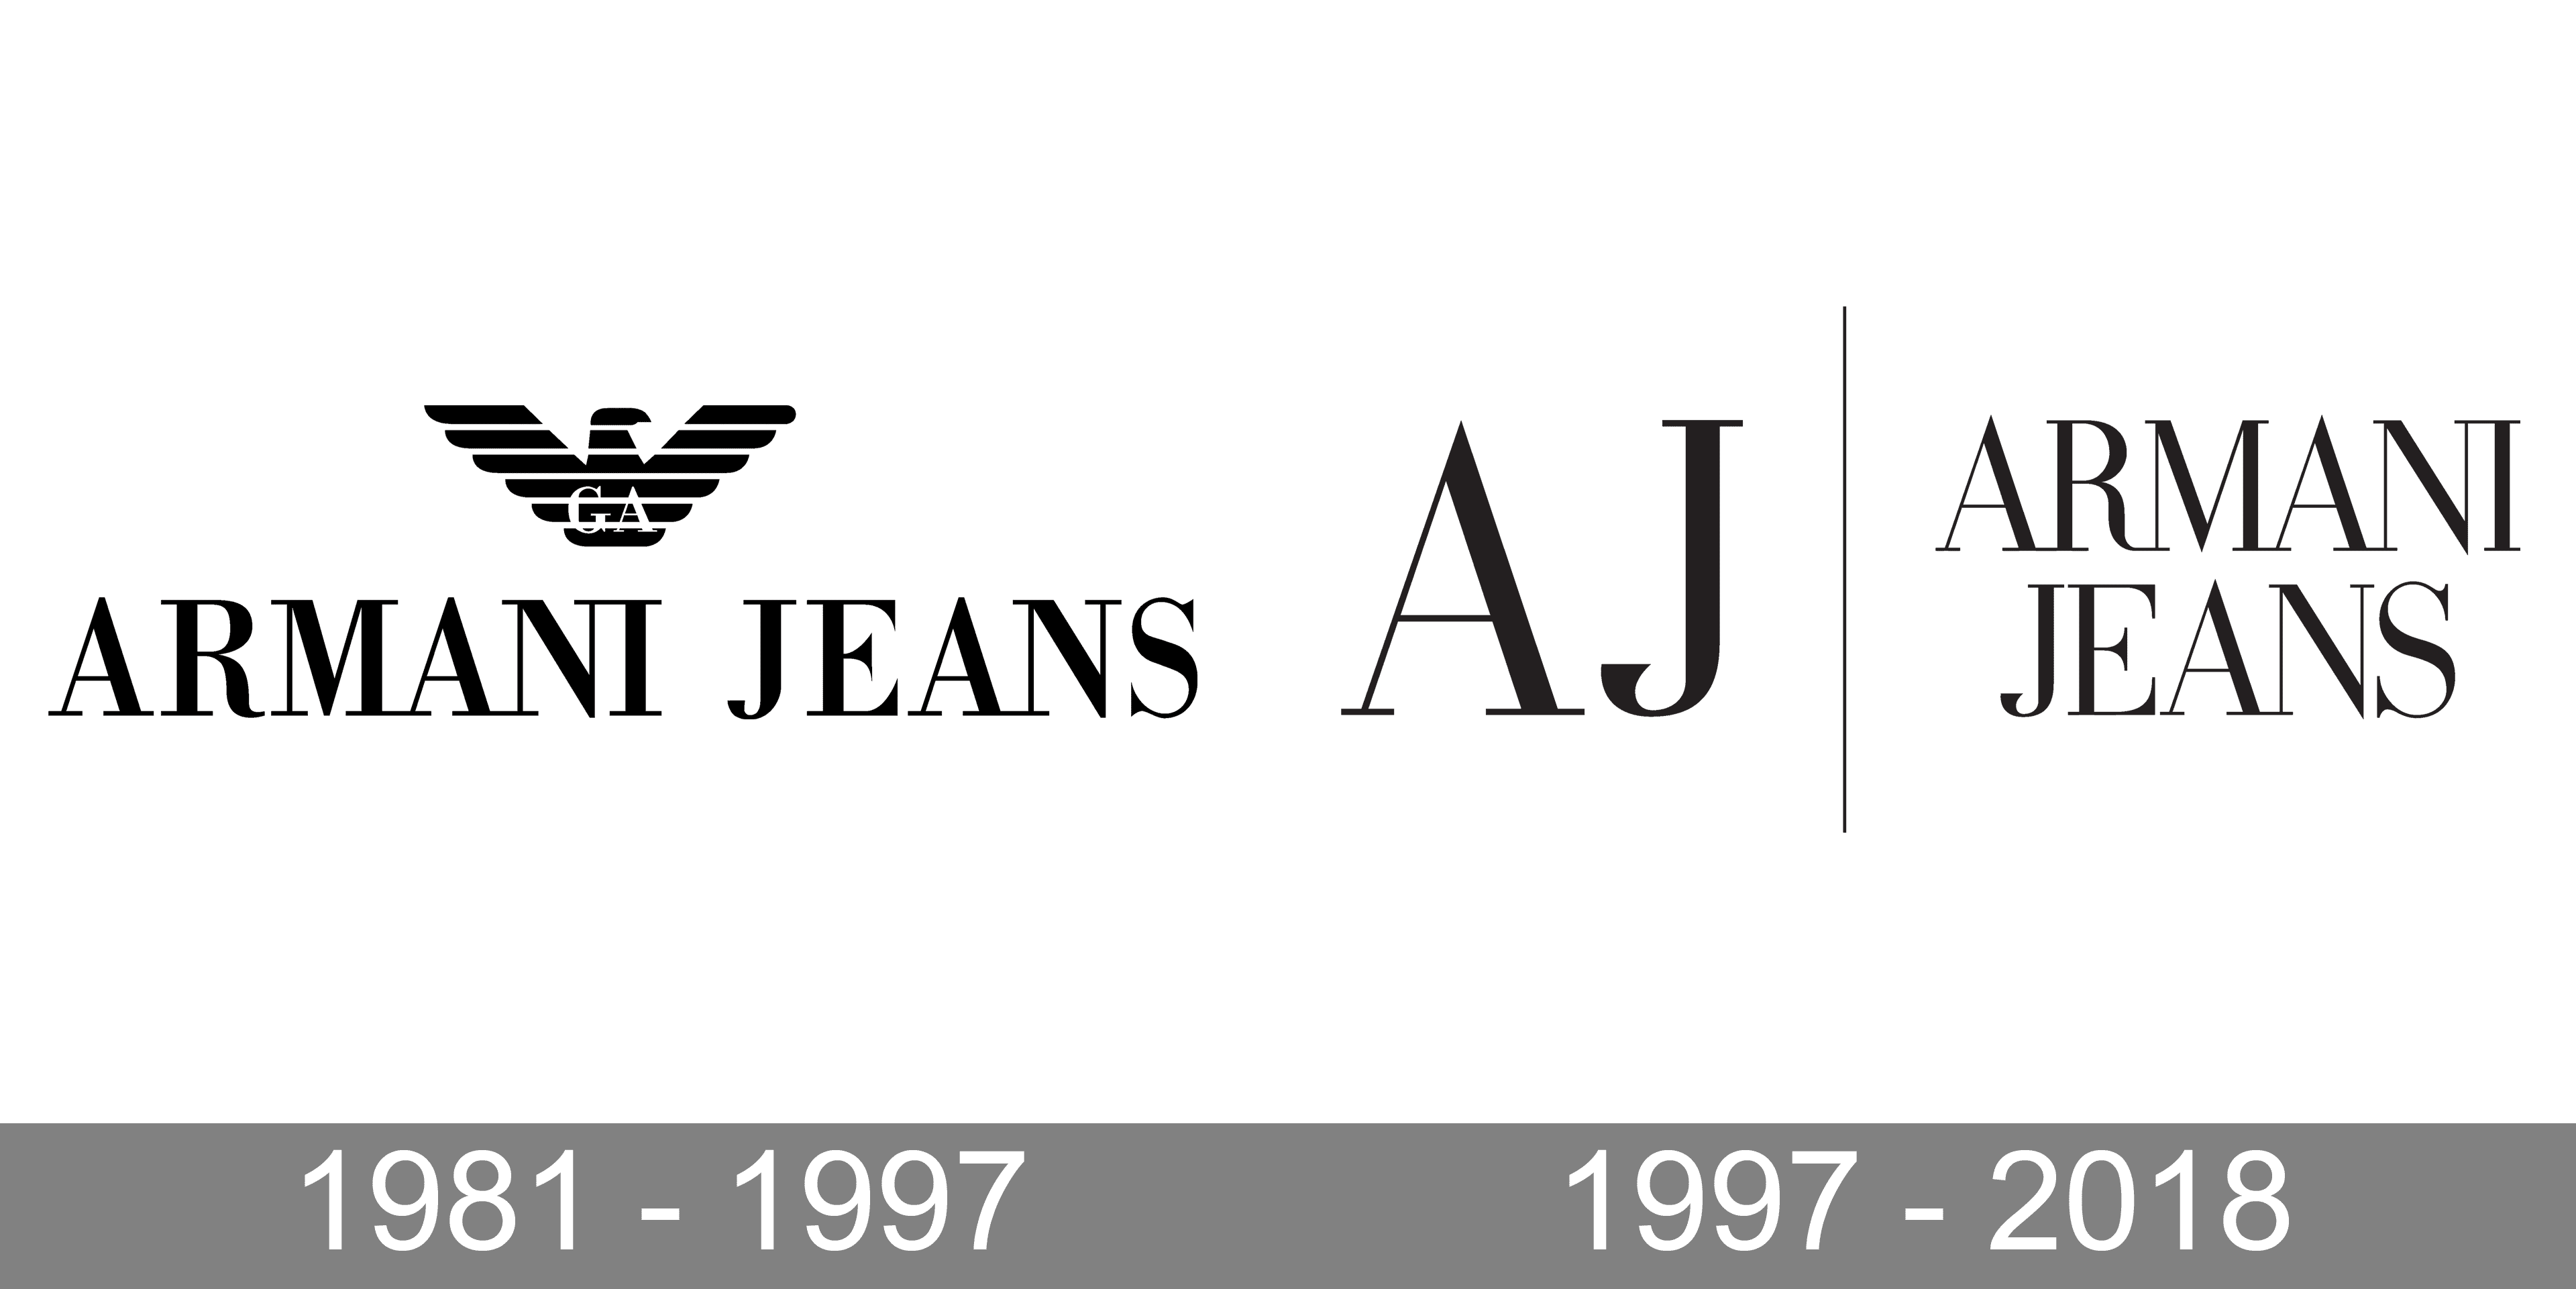 Giorgio Armani Logo and symbol, meaning, history, PNG, brand